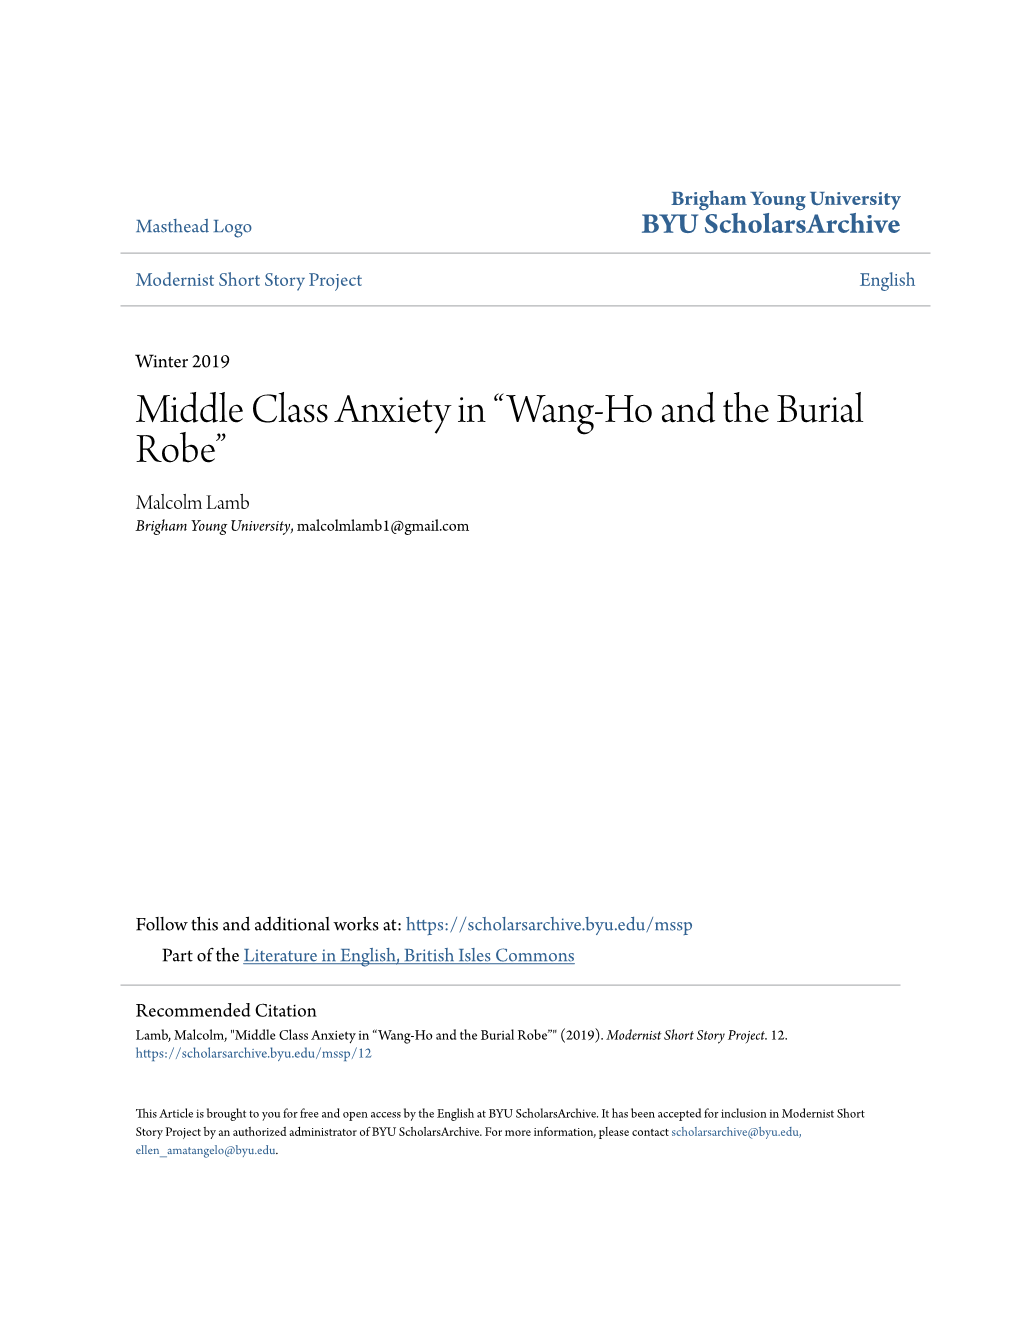 Middle Class Anxiety in “Wang-Ho and the Burial Robe” Malcolm Lamb Brigham Young University, Malcolmlamb1@Gmail.Com